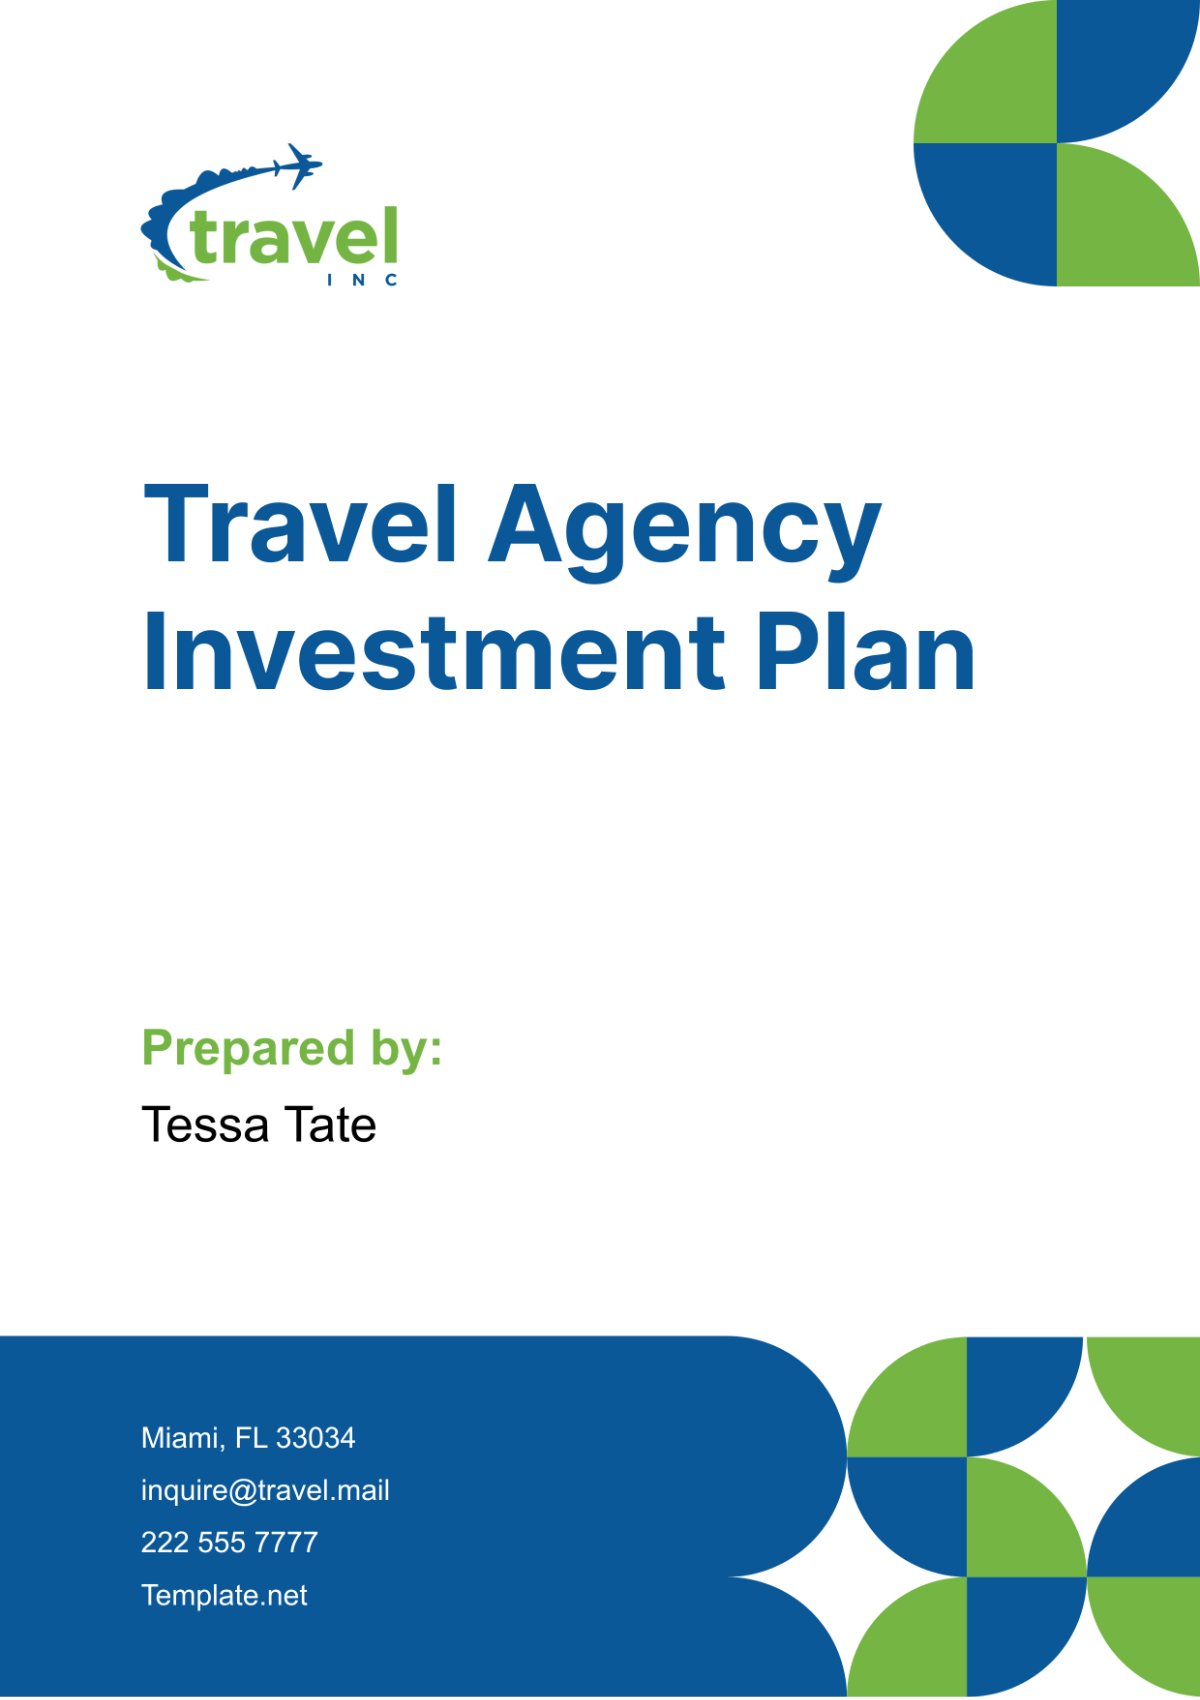 Travel Agency Investment Plan Template